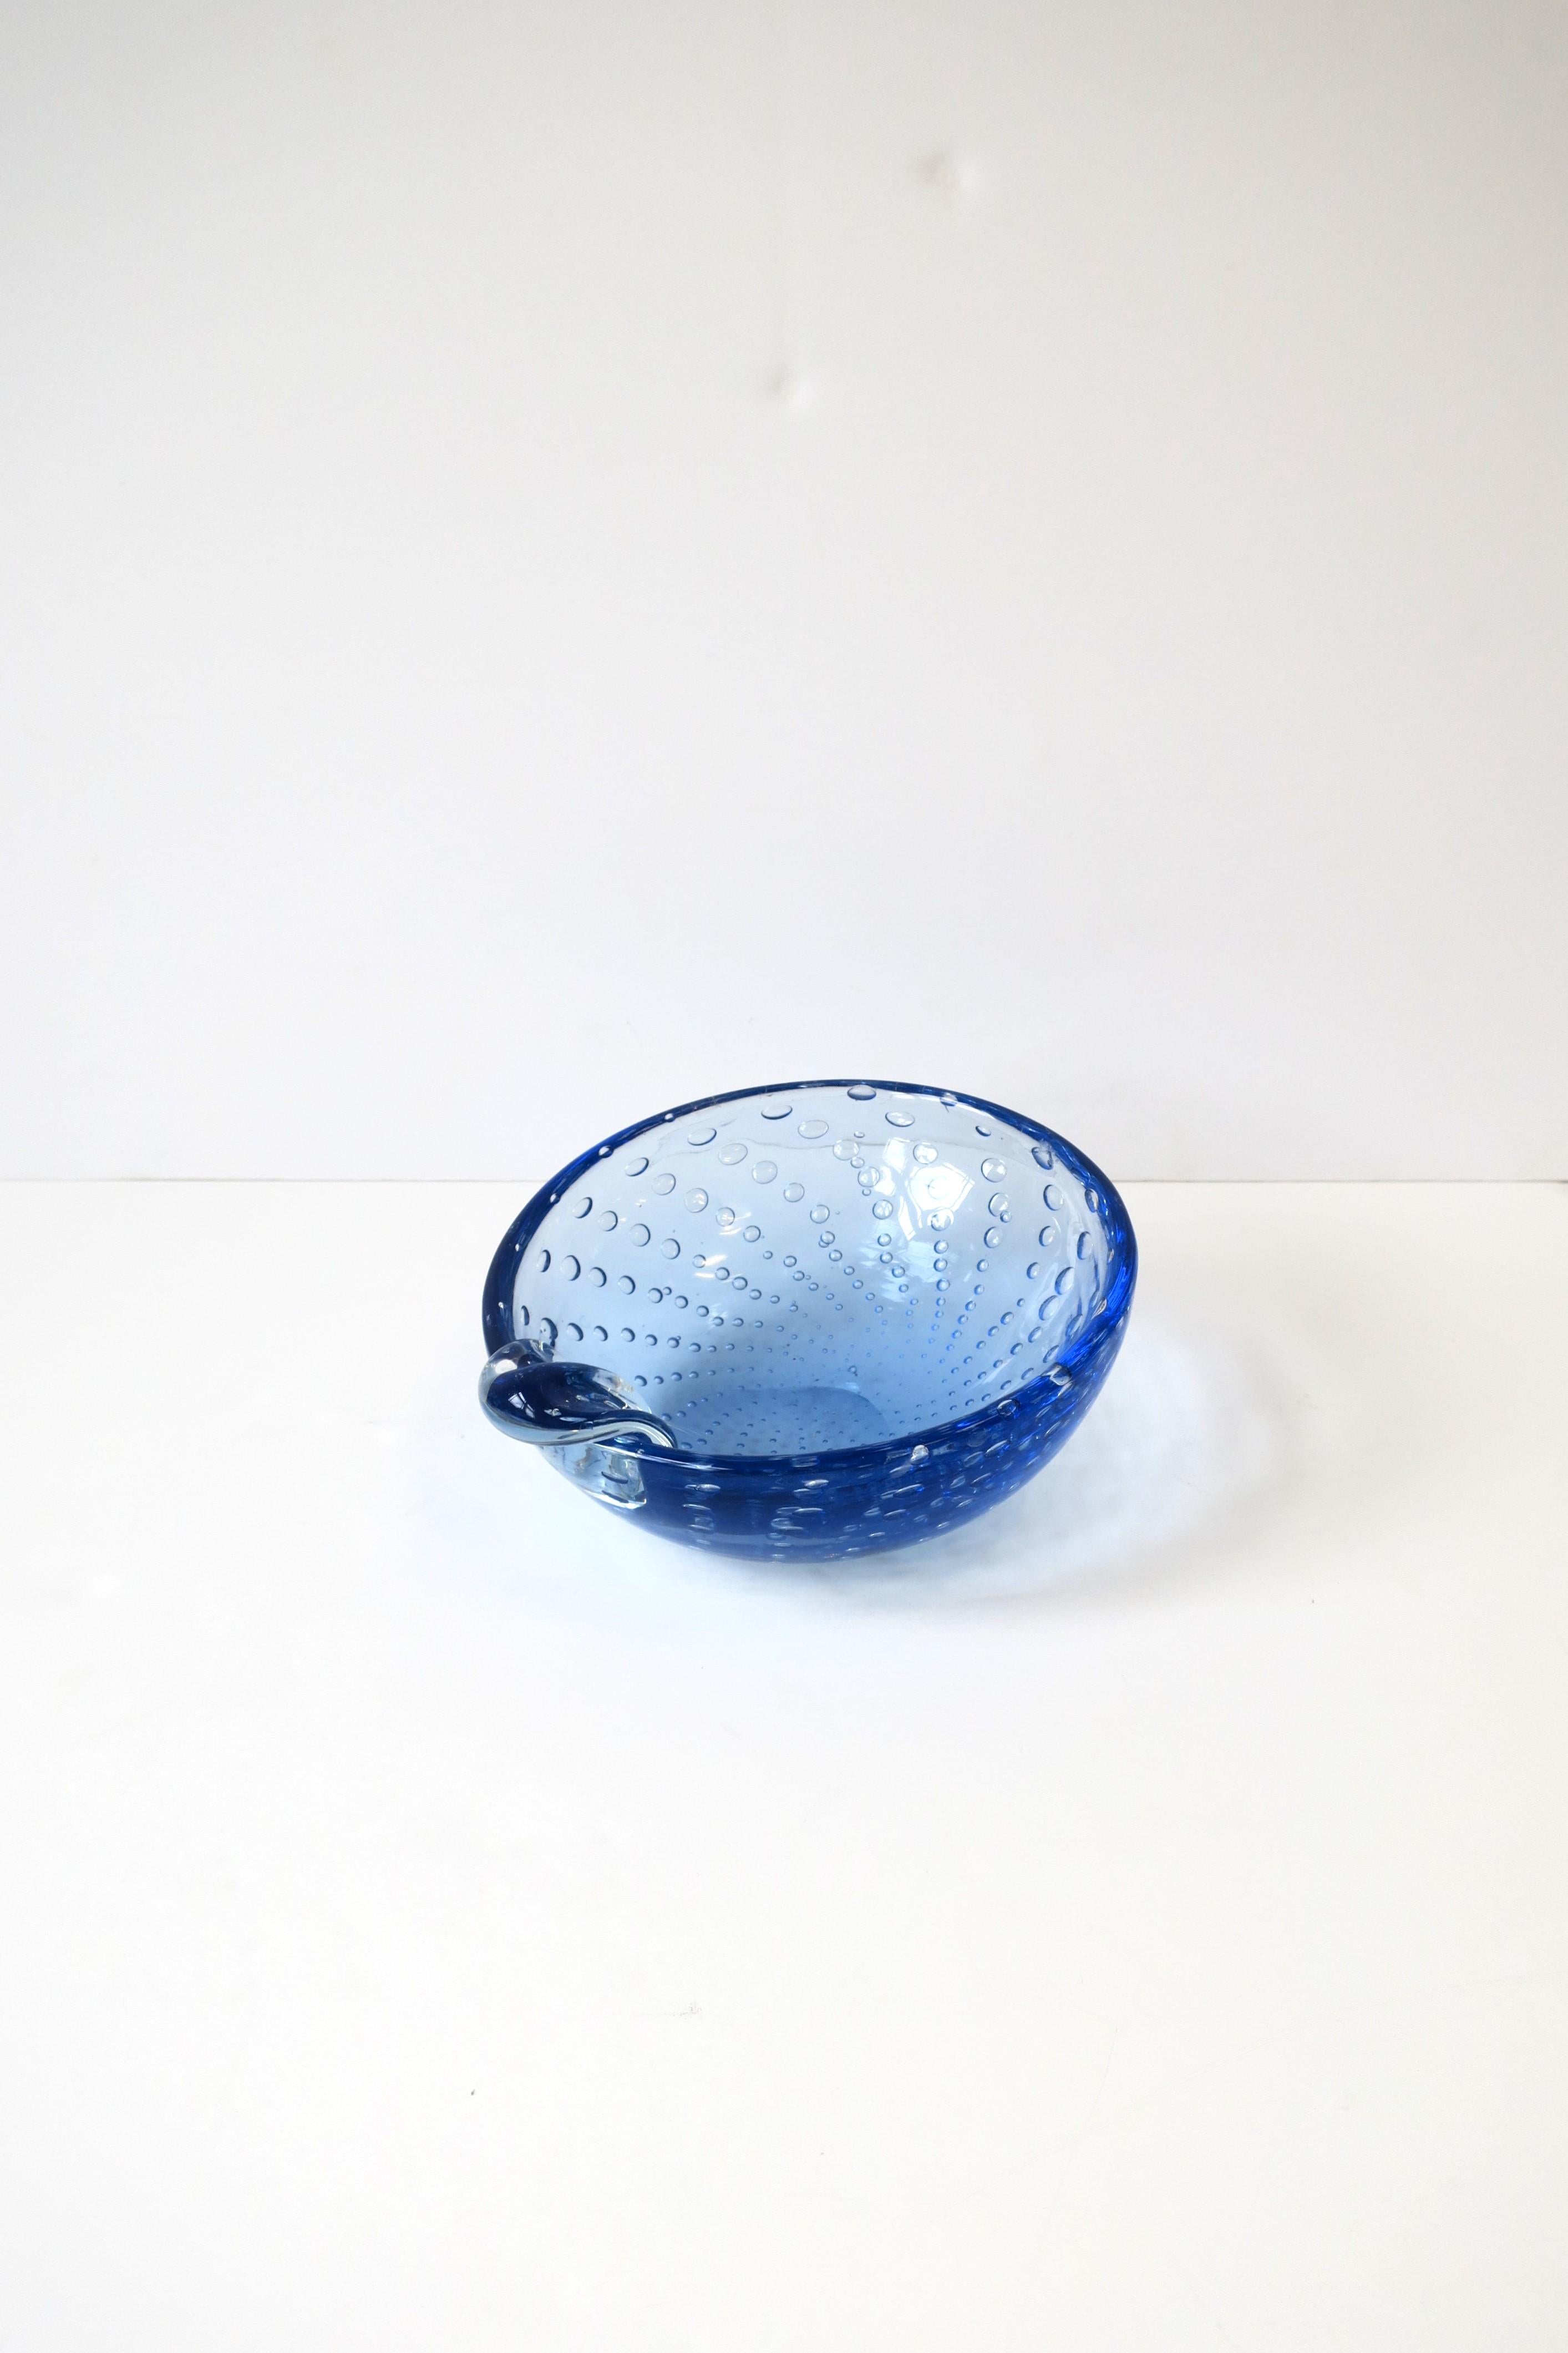 An Italian Murano art glass bowl or ashtray in the style of Seguso, circa mid-20th century, Italy. Bowl is a blue hue with a controlled bubble design. Great as a standalone piece, jewelry catchall, nut bowl, etc., or as an ashtray with its